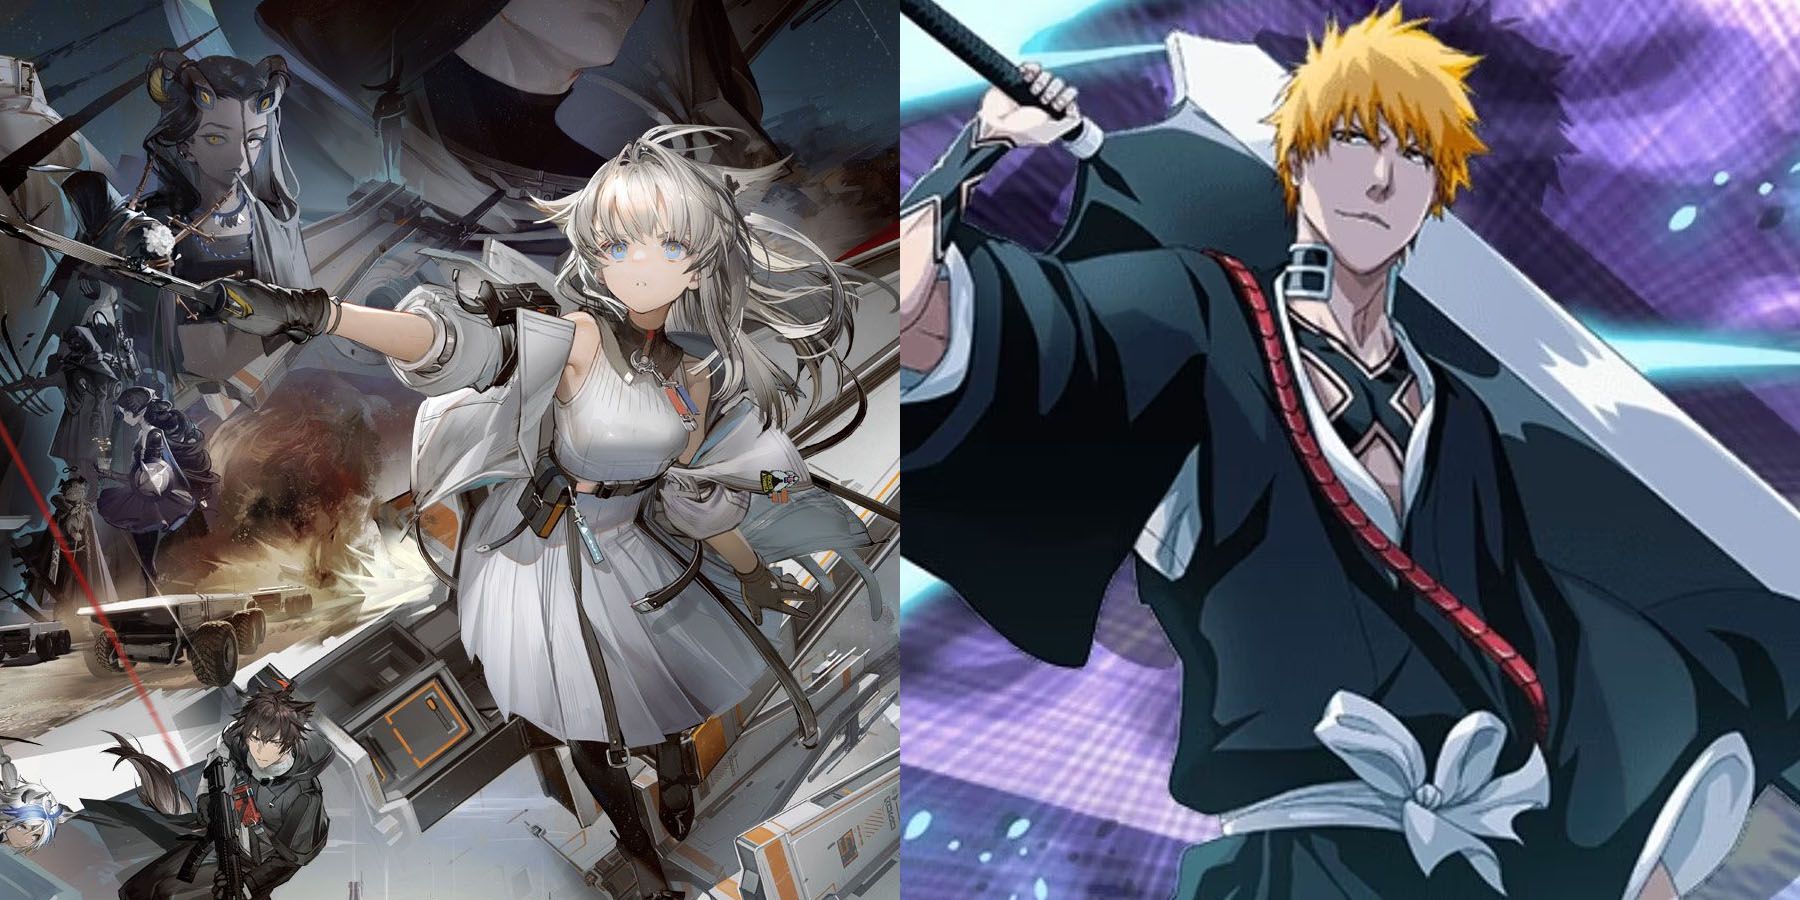 TOP 10 Most Popular Anime Style Mobile Gacha Games By Daily Active Users  September2019check to see if your games on the list  rFireEmblemHeroes